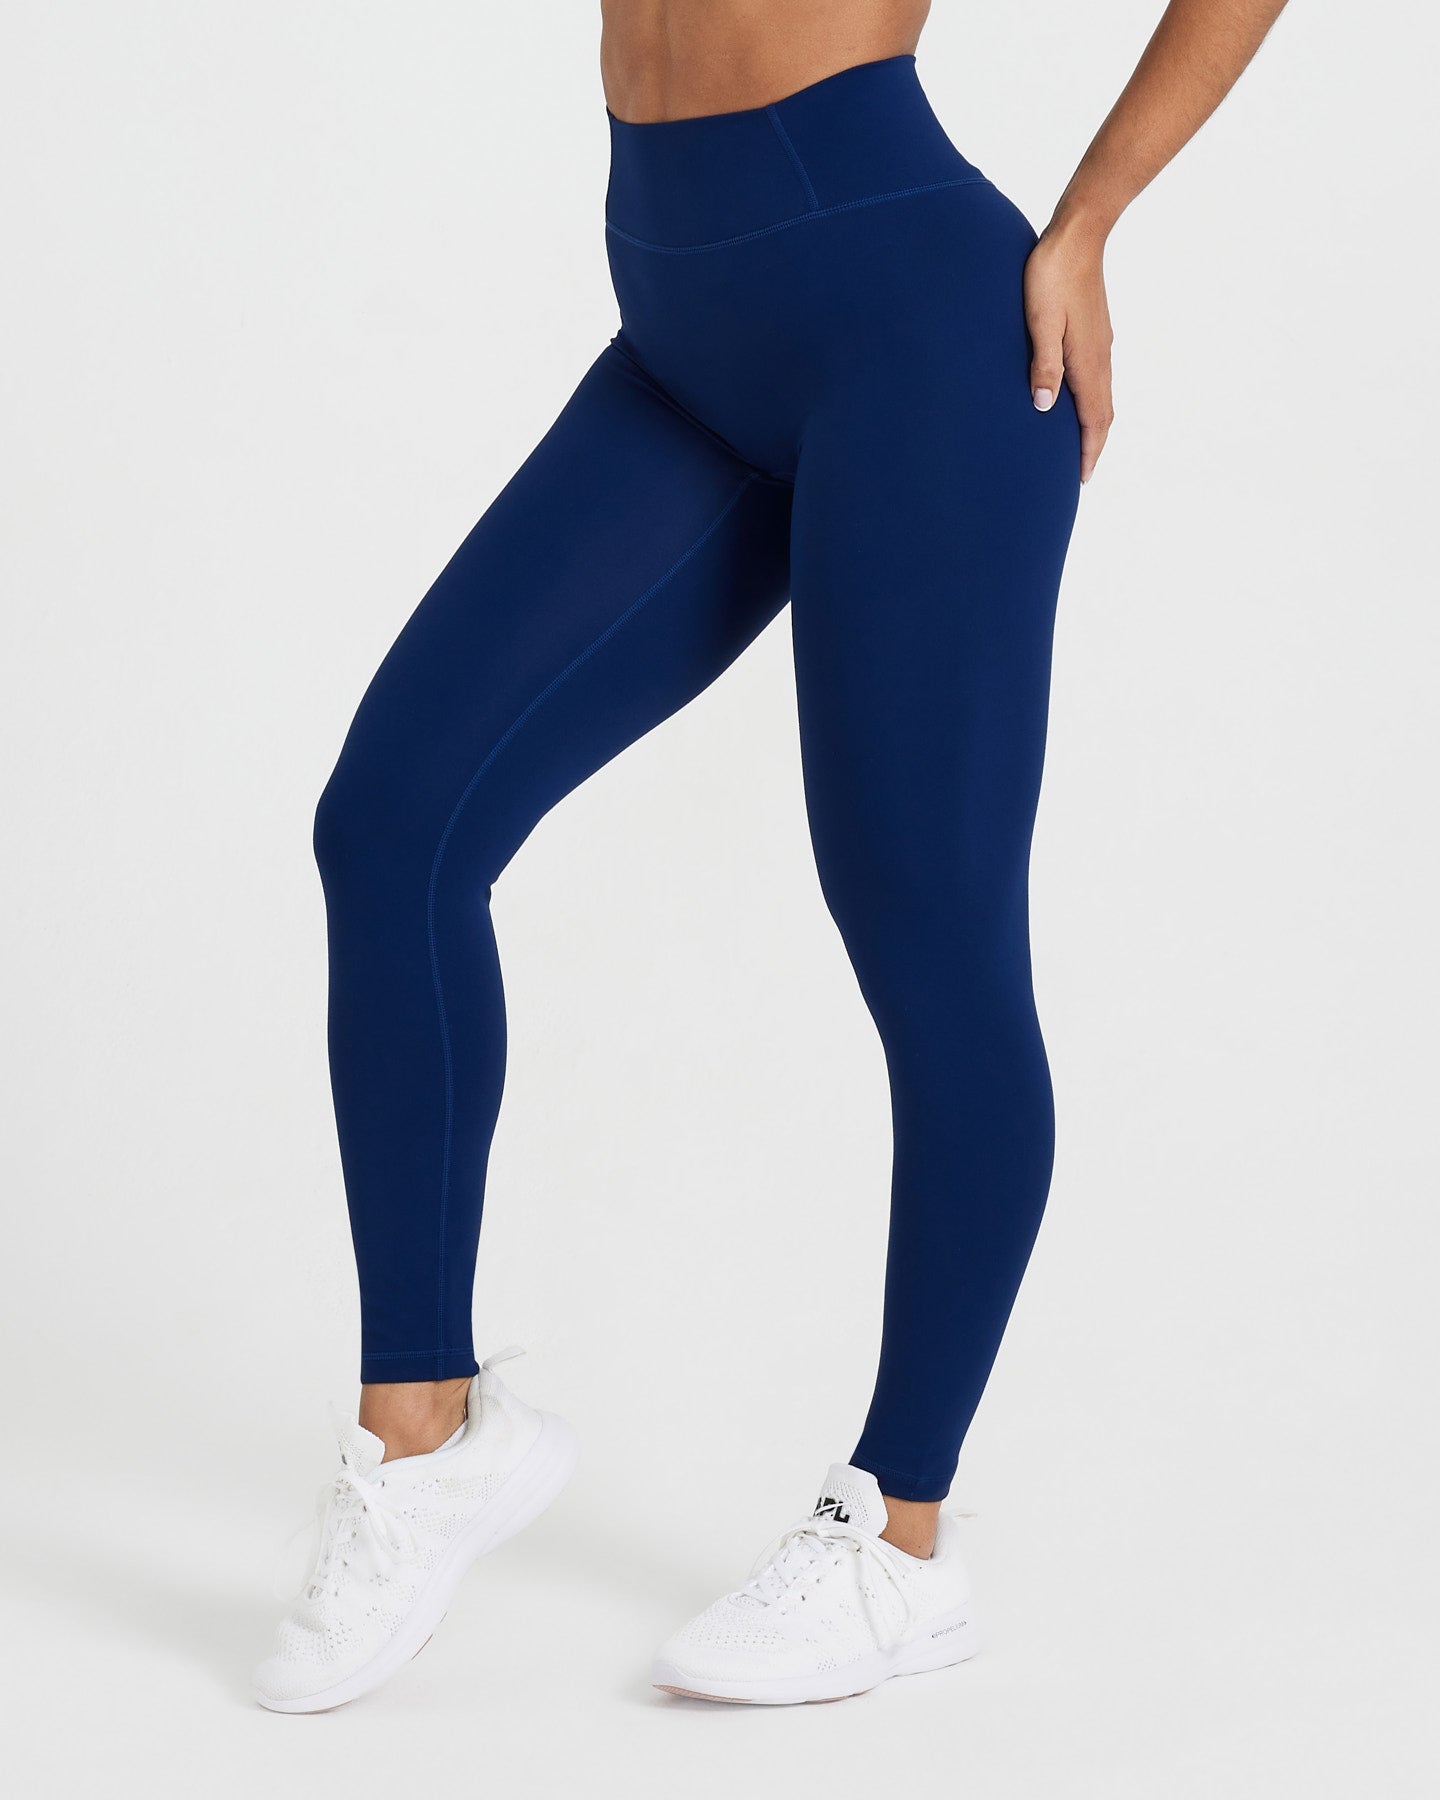 Women\'s Leggings with ultimate Glute Separation | Oner Active US